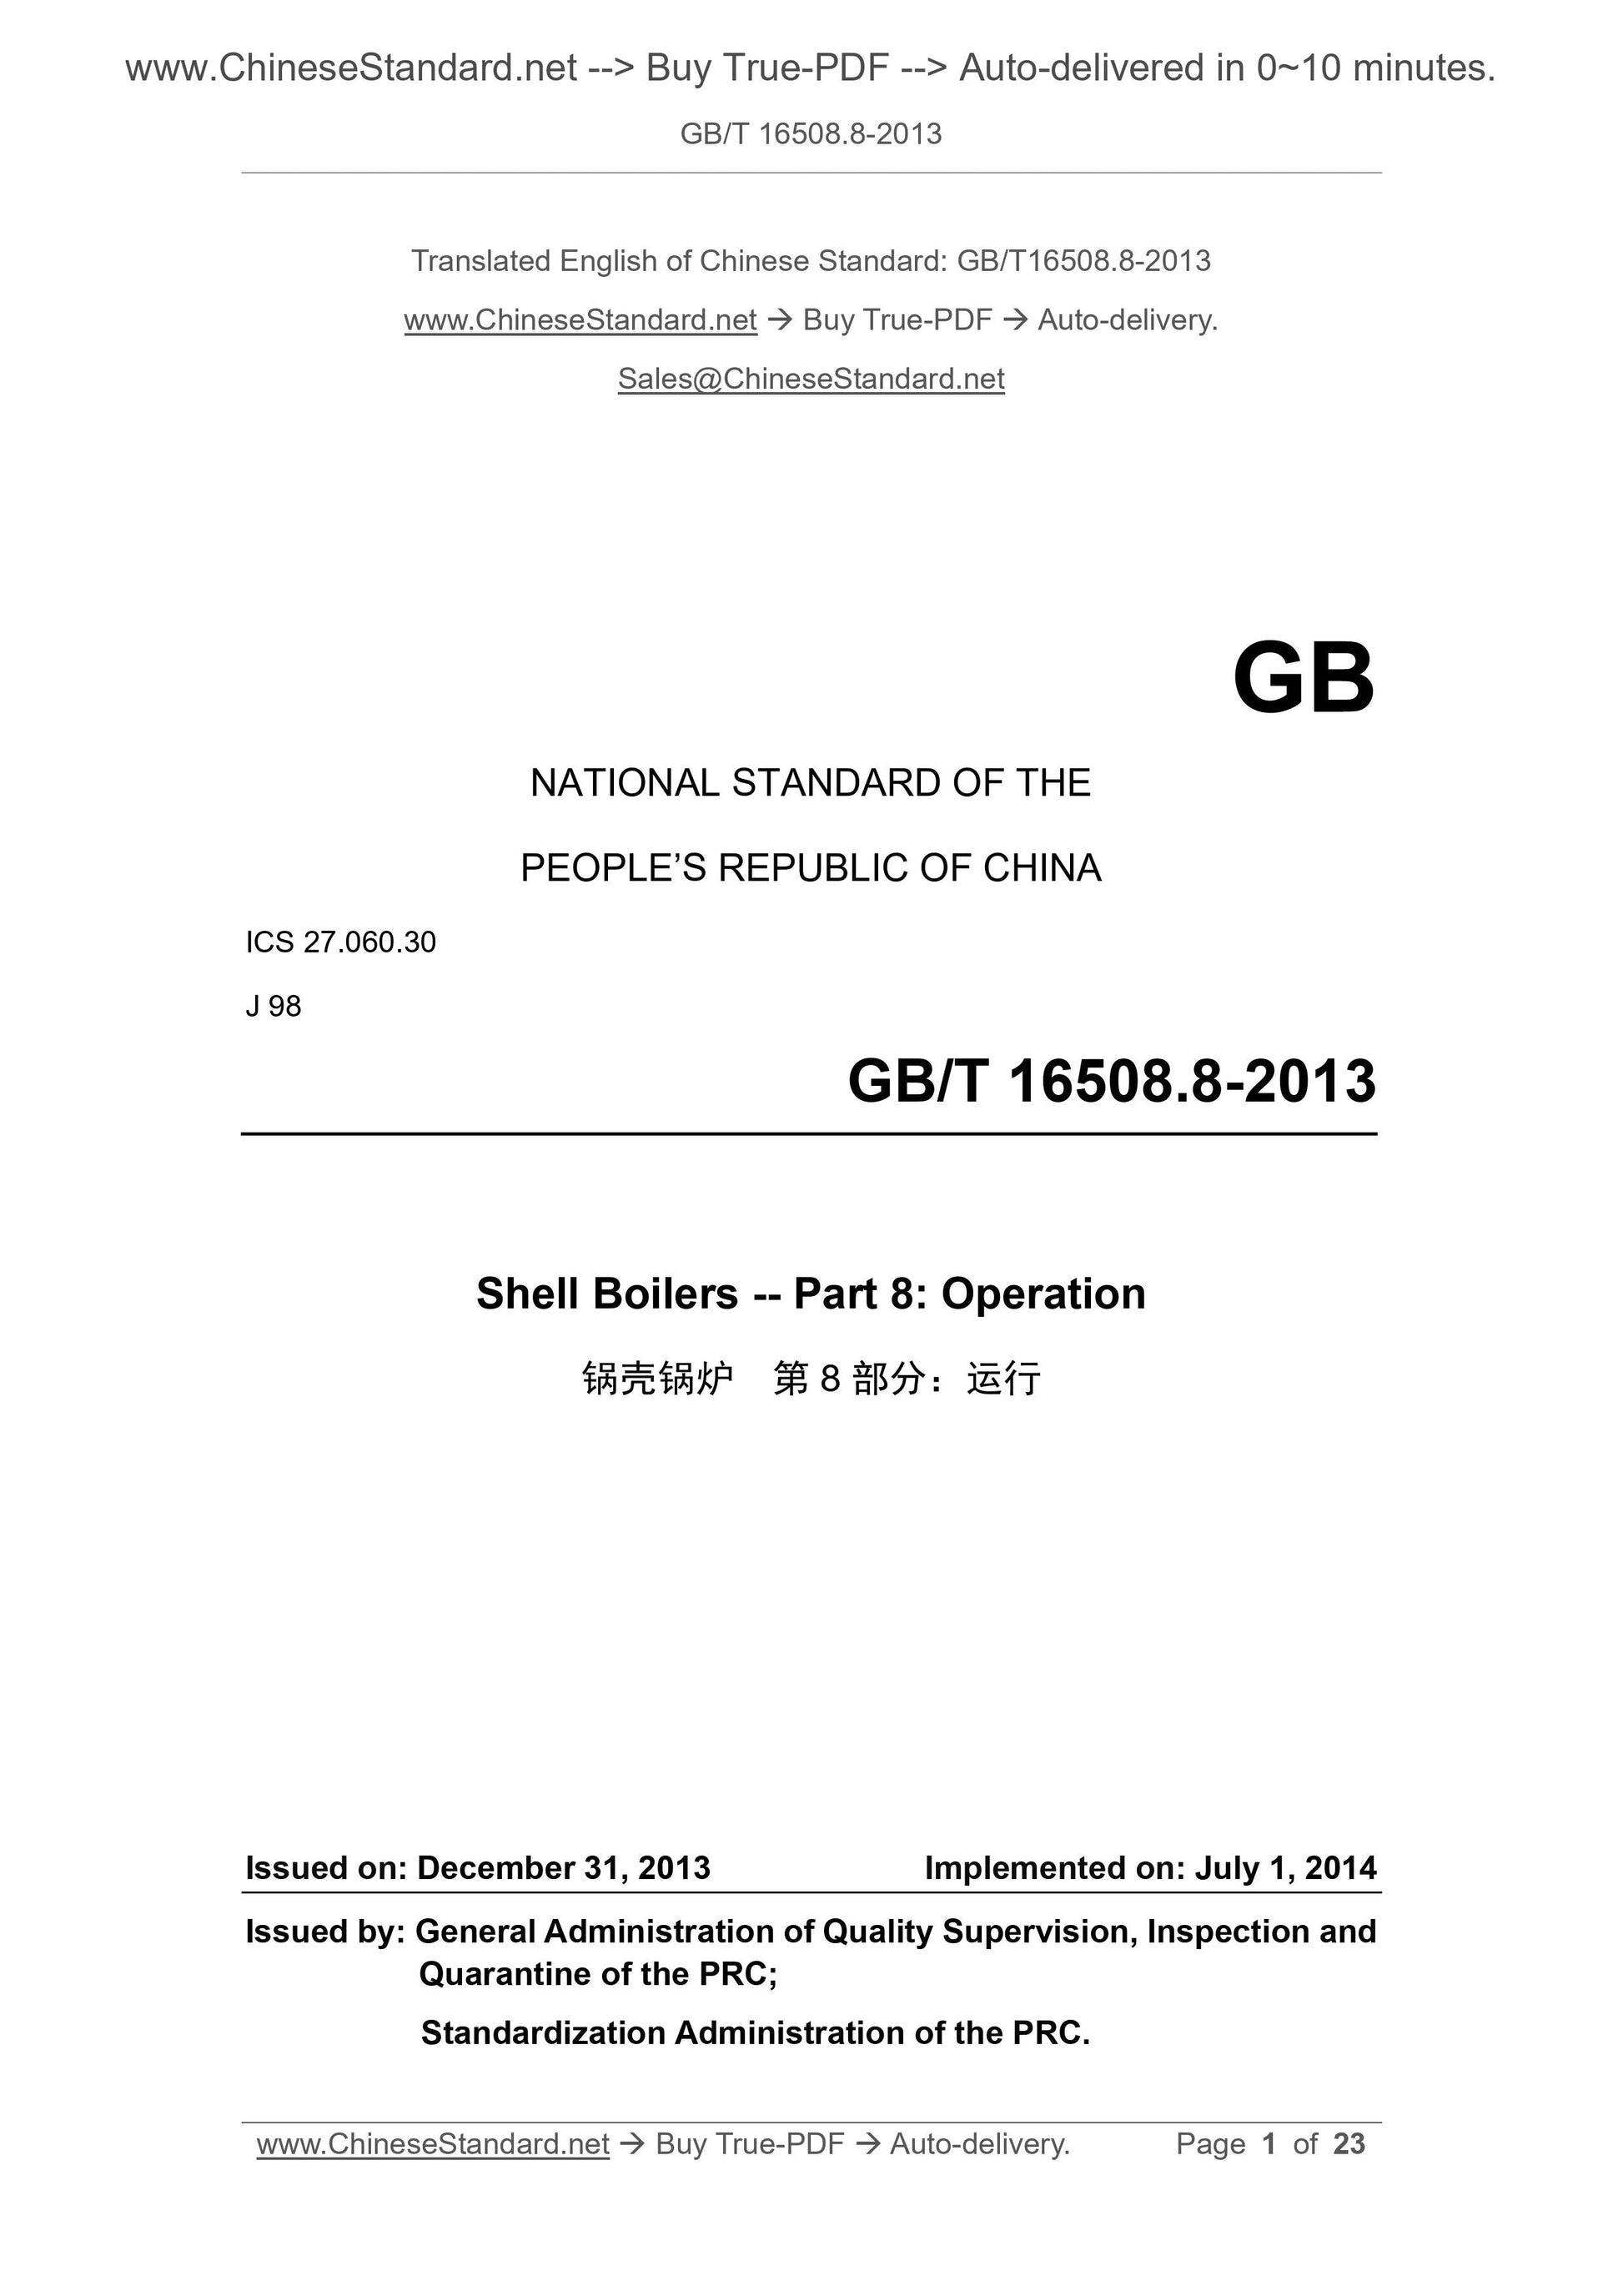 GB/T 16508.8-2013 Page 1